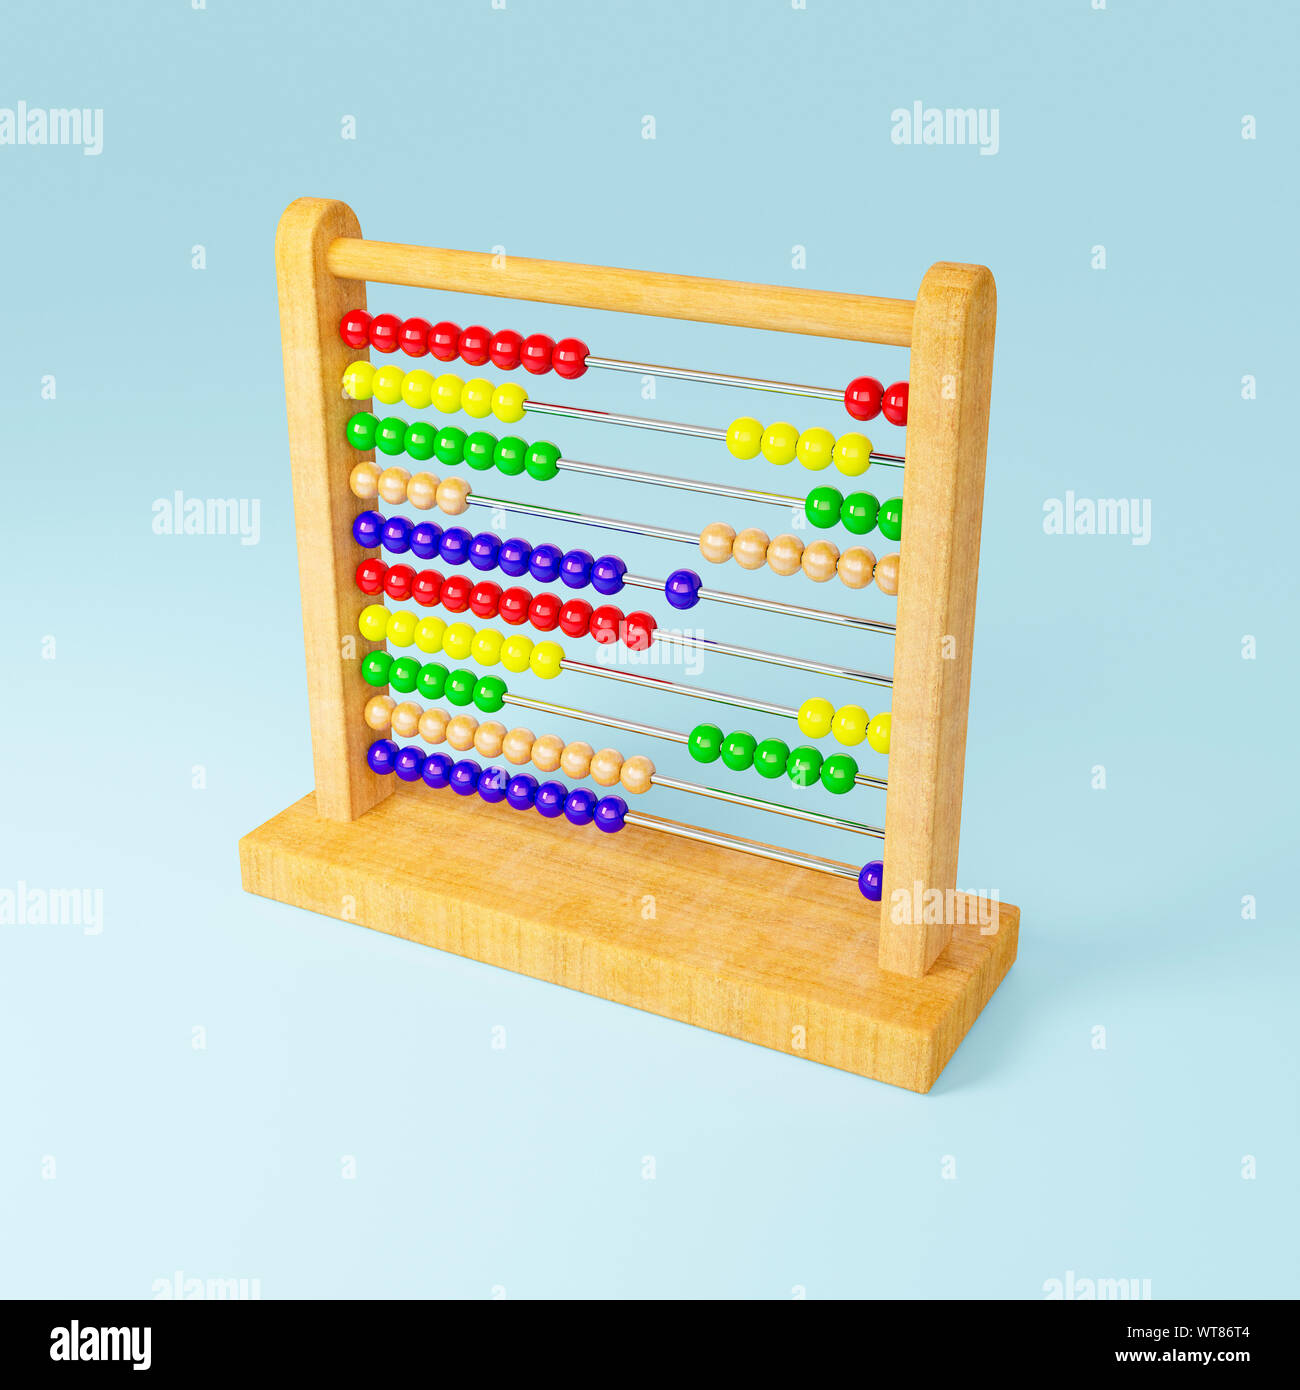 Childrens wooden toys, a wooden abacus Stock Photo